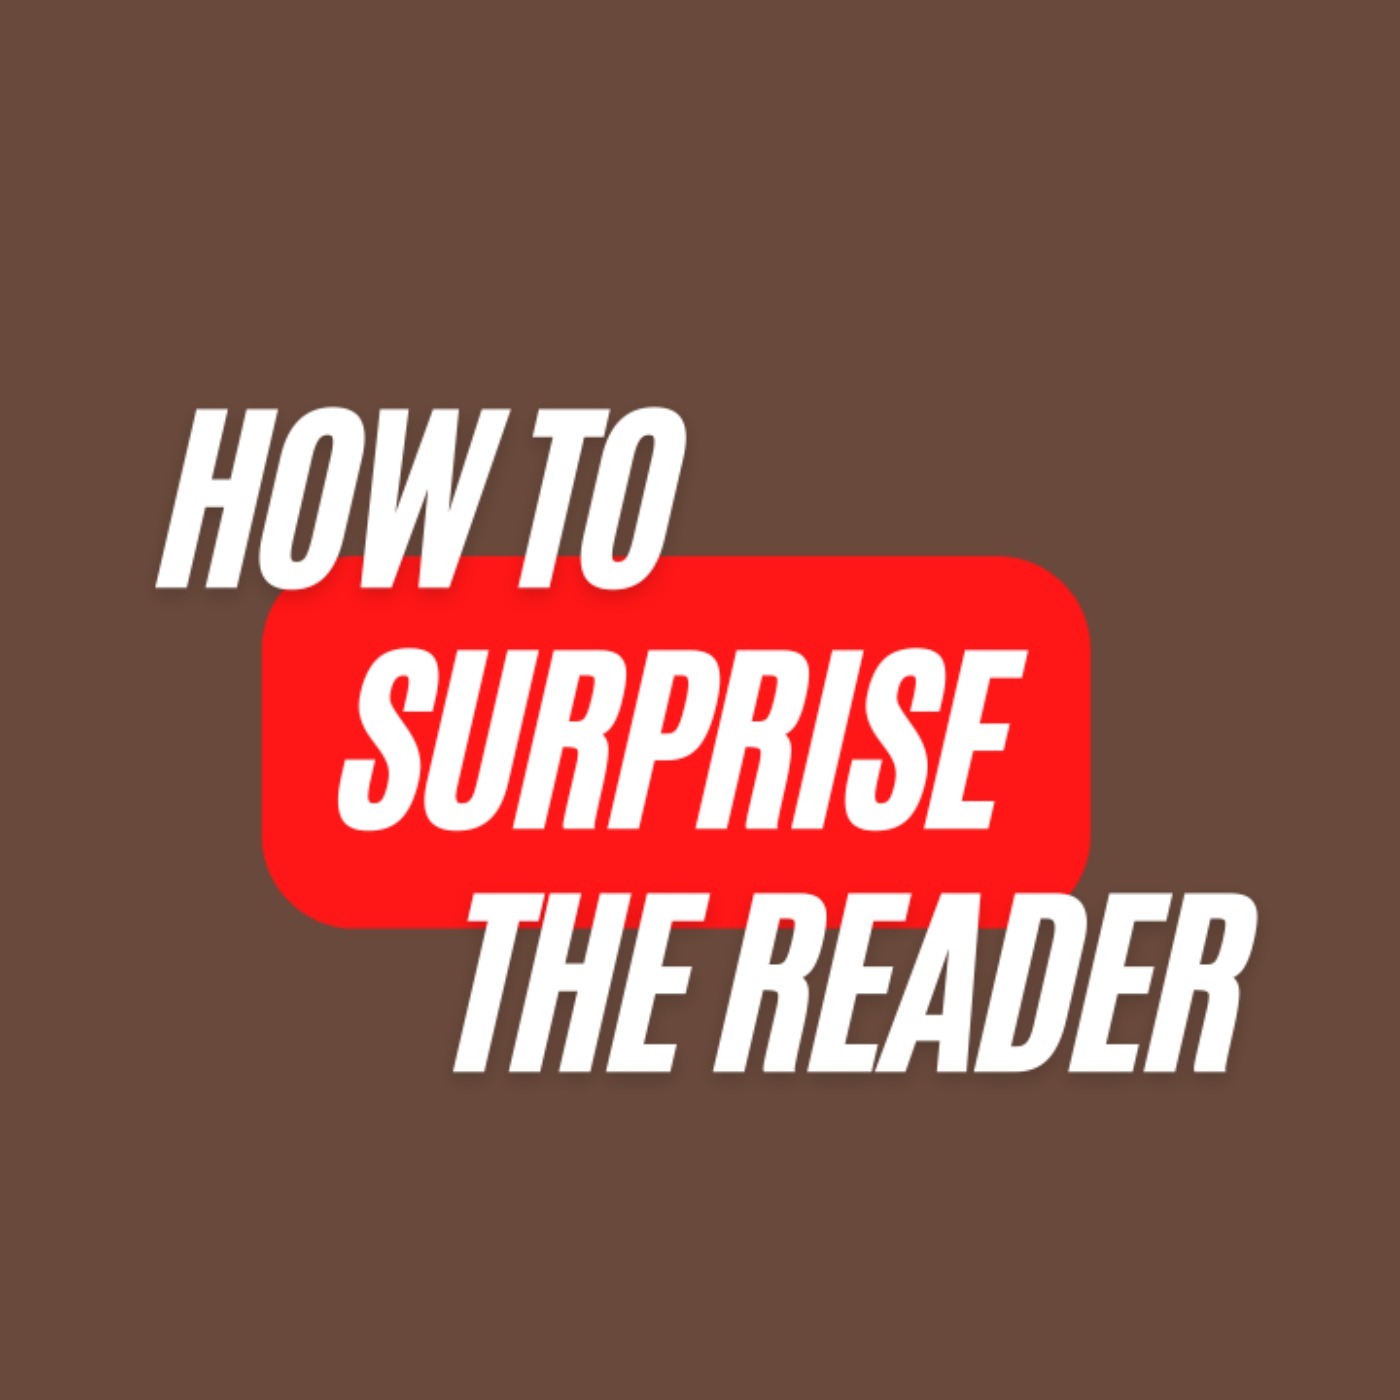 Ep. 376: How to Surprise the Reader (BIG TIME) with David Ellis